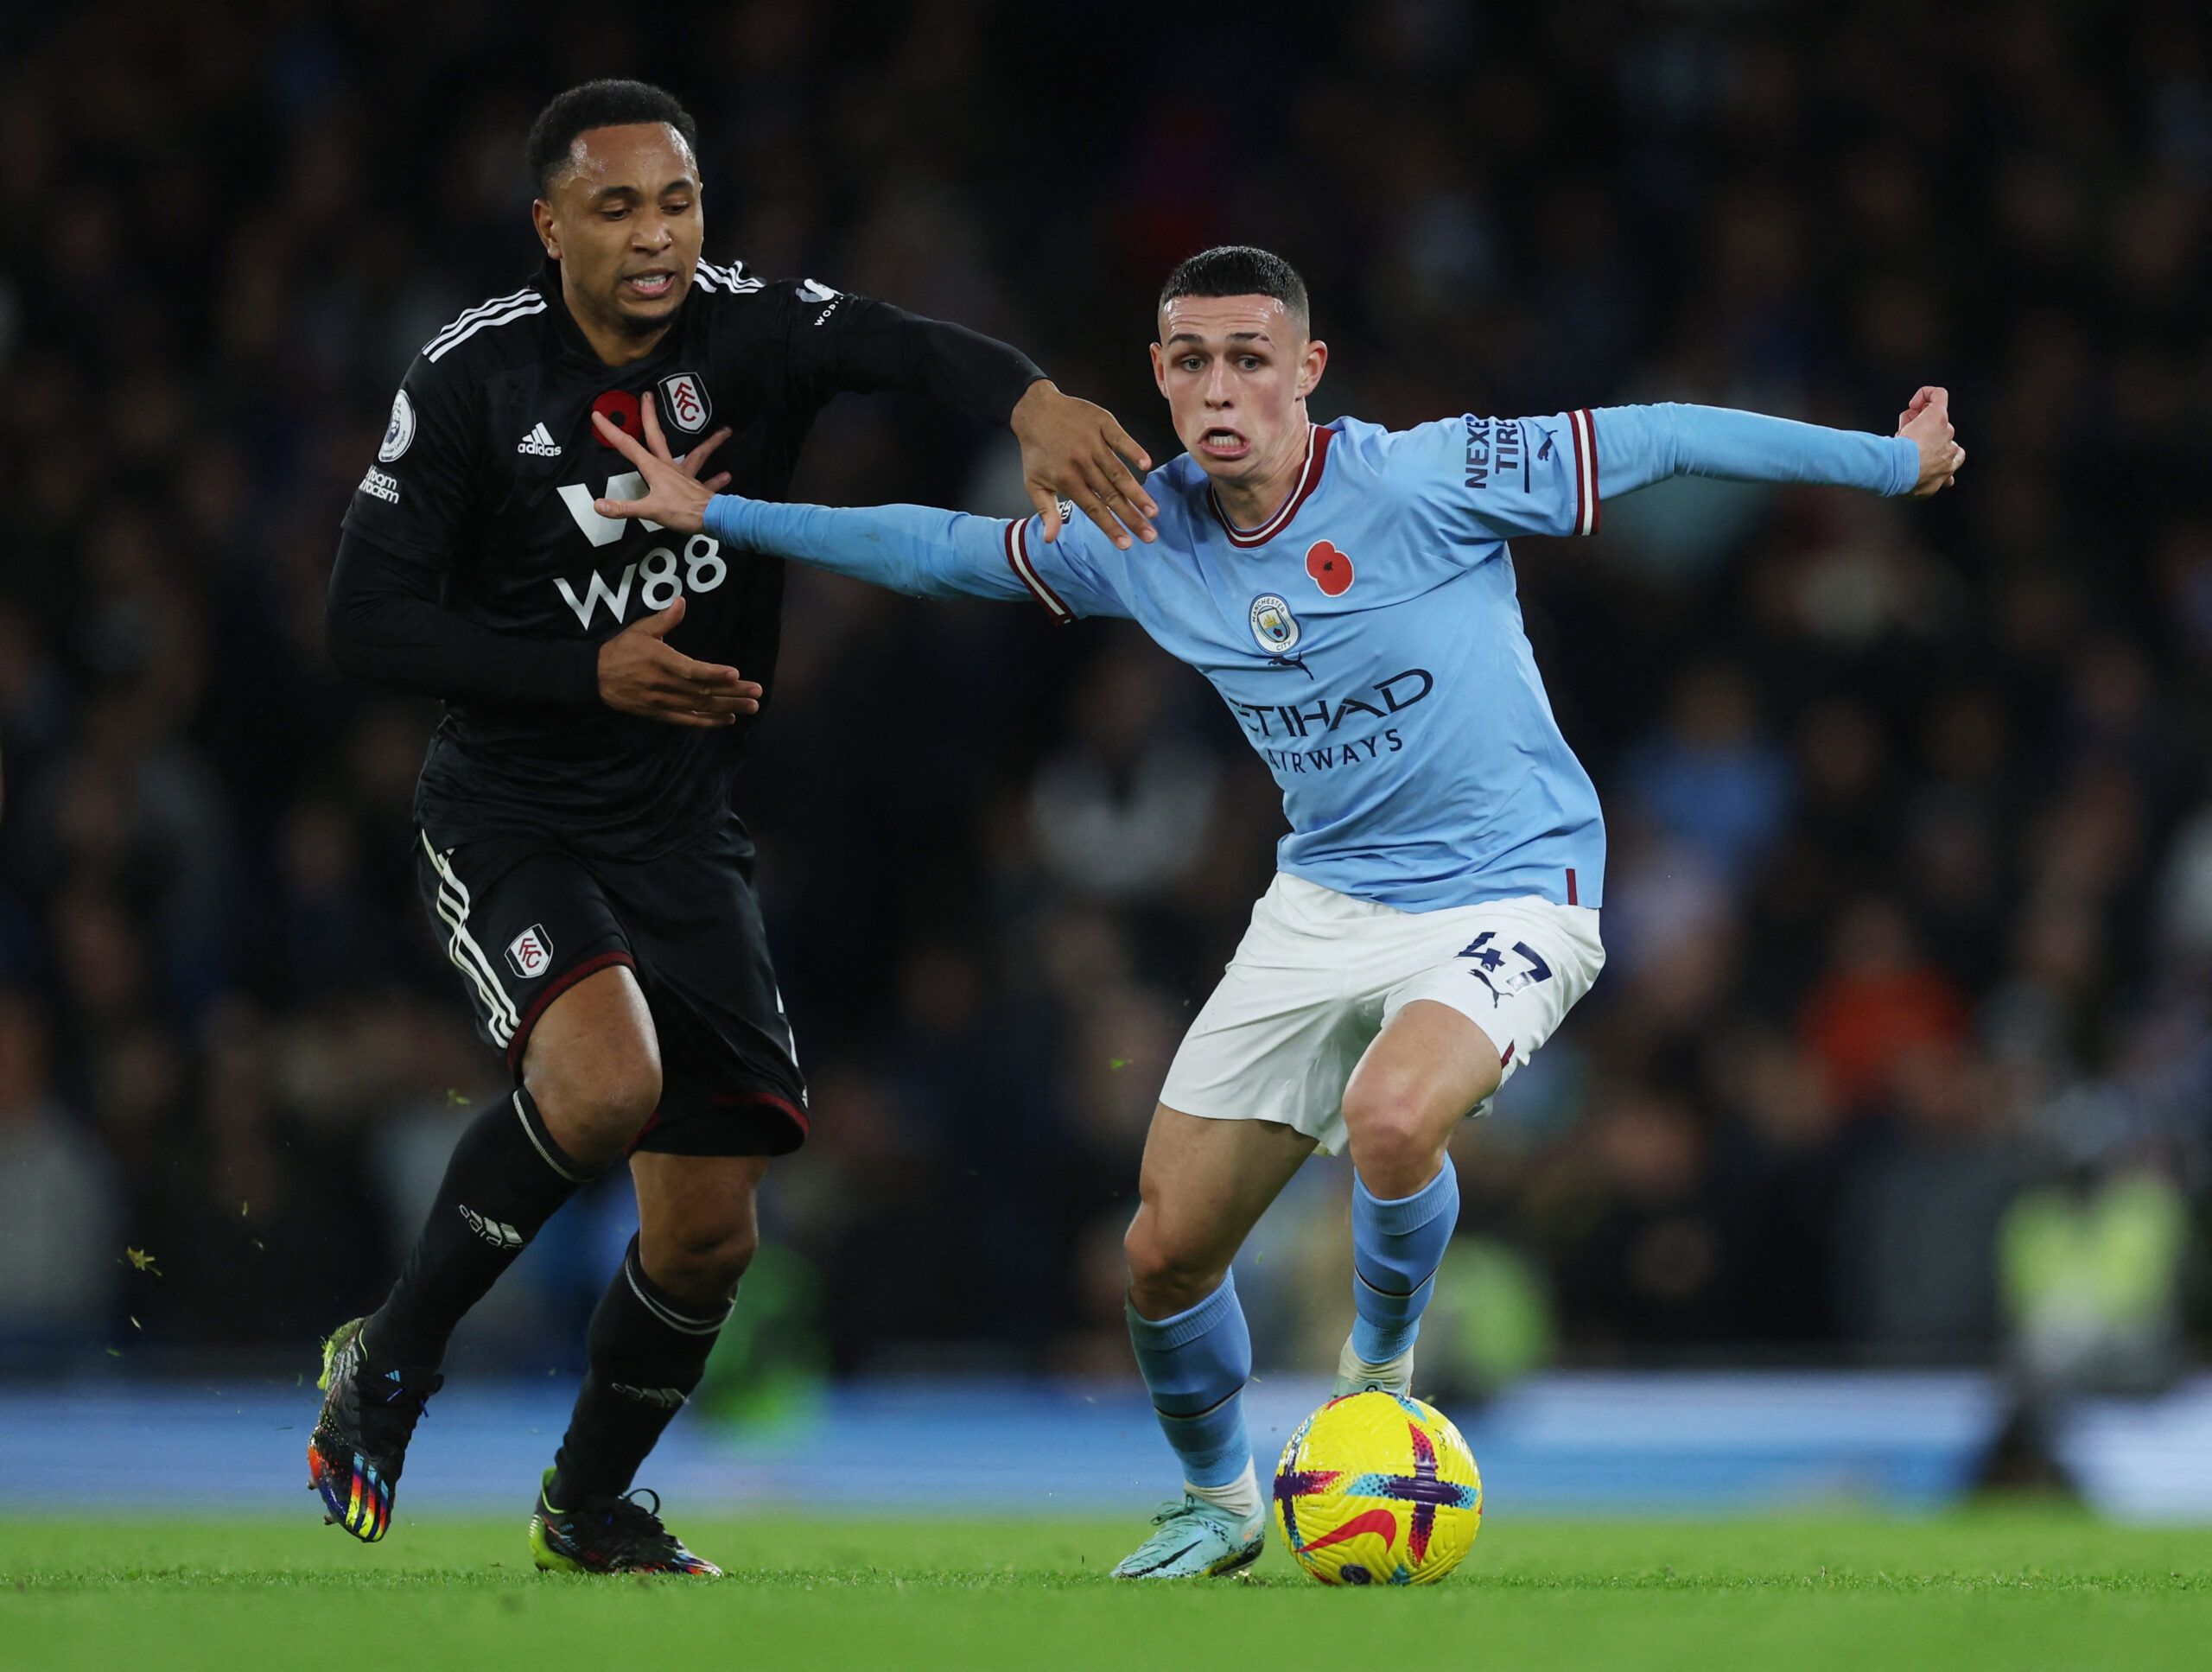 Soccer Football - Premier League - Manchester City v Fulham - Etihad Stadium, Manchester, Britain - November 5, 2022 Fulham's Kenny Tete in action with Manchester City's Phil Foden Action Images via Reuters/Lee Smith EDITORIAL USE ONLY. No use with unauthorized audio, video, data, fixture lists, club/league logos or 'live' services. Online in-match use limited to 75 images, no video emulation. No use in betting, games or single club /league/player publications.  Please contact your account repre